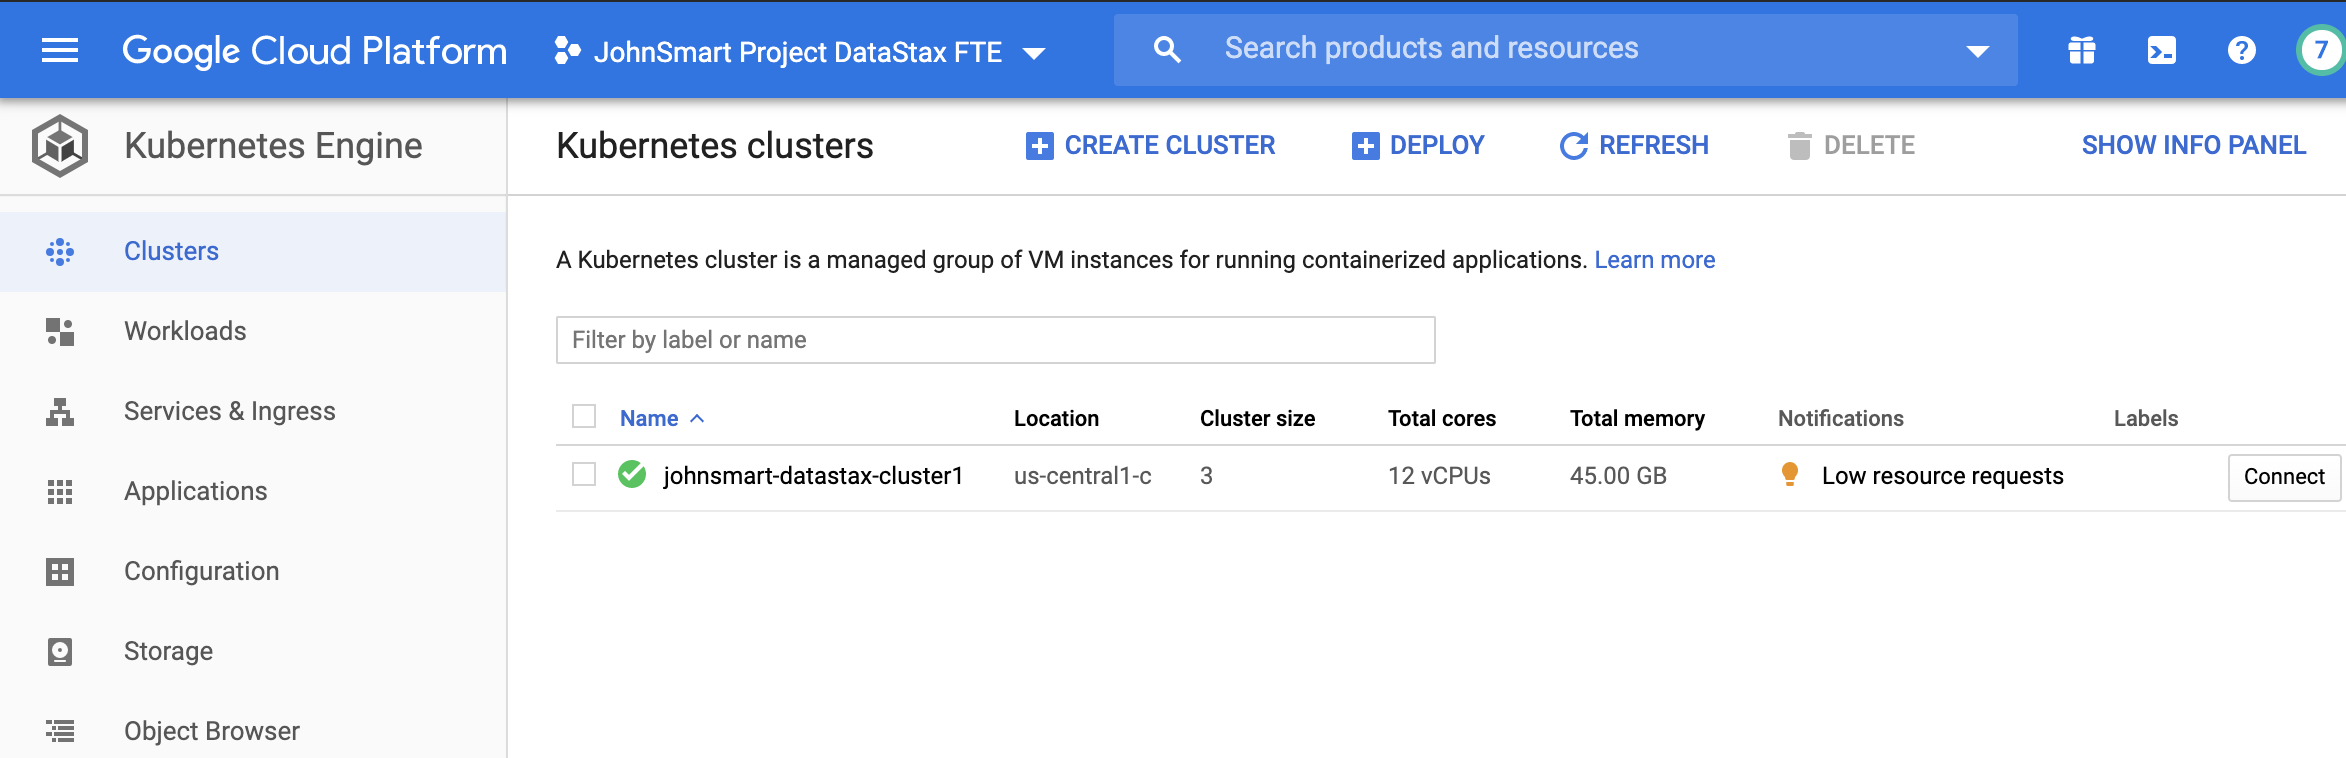 Google Cloud Console shows the created cluster on its Cluster tab